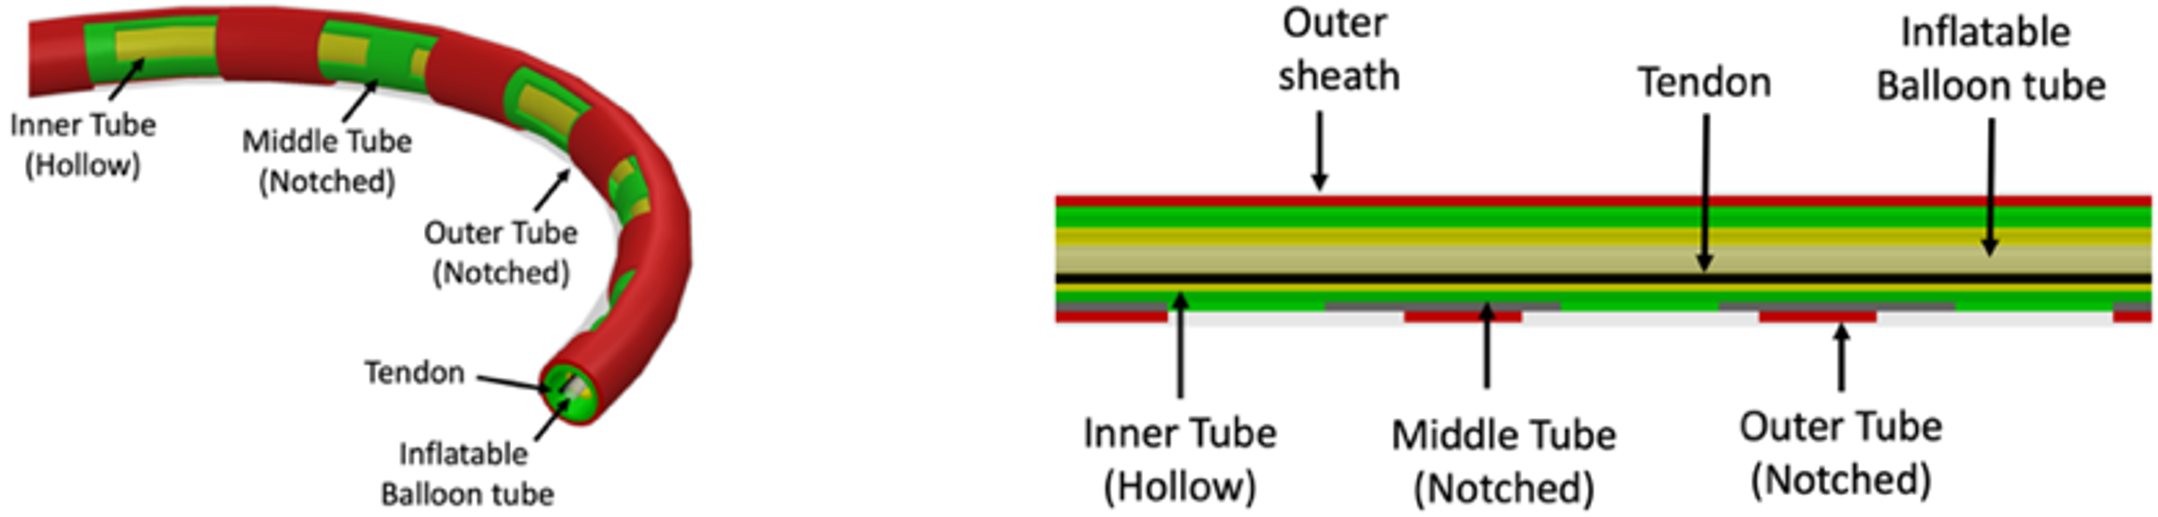 Outer sheath with inner hollow tube, notched middle tube, and a notched outer tube. Cutaway shows the tendon and inflatable balloon are inside the inner hollow tube. 